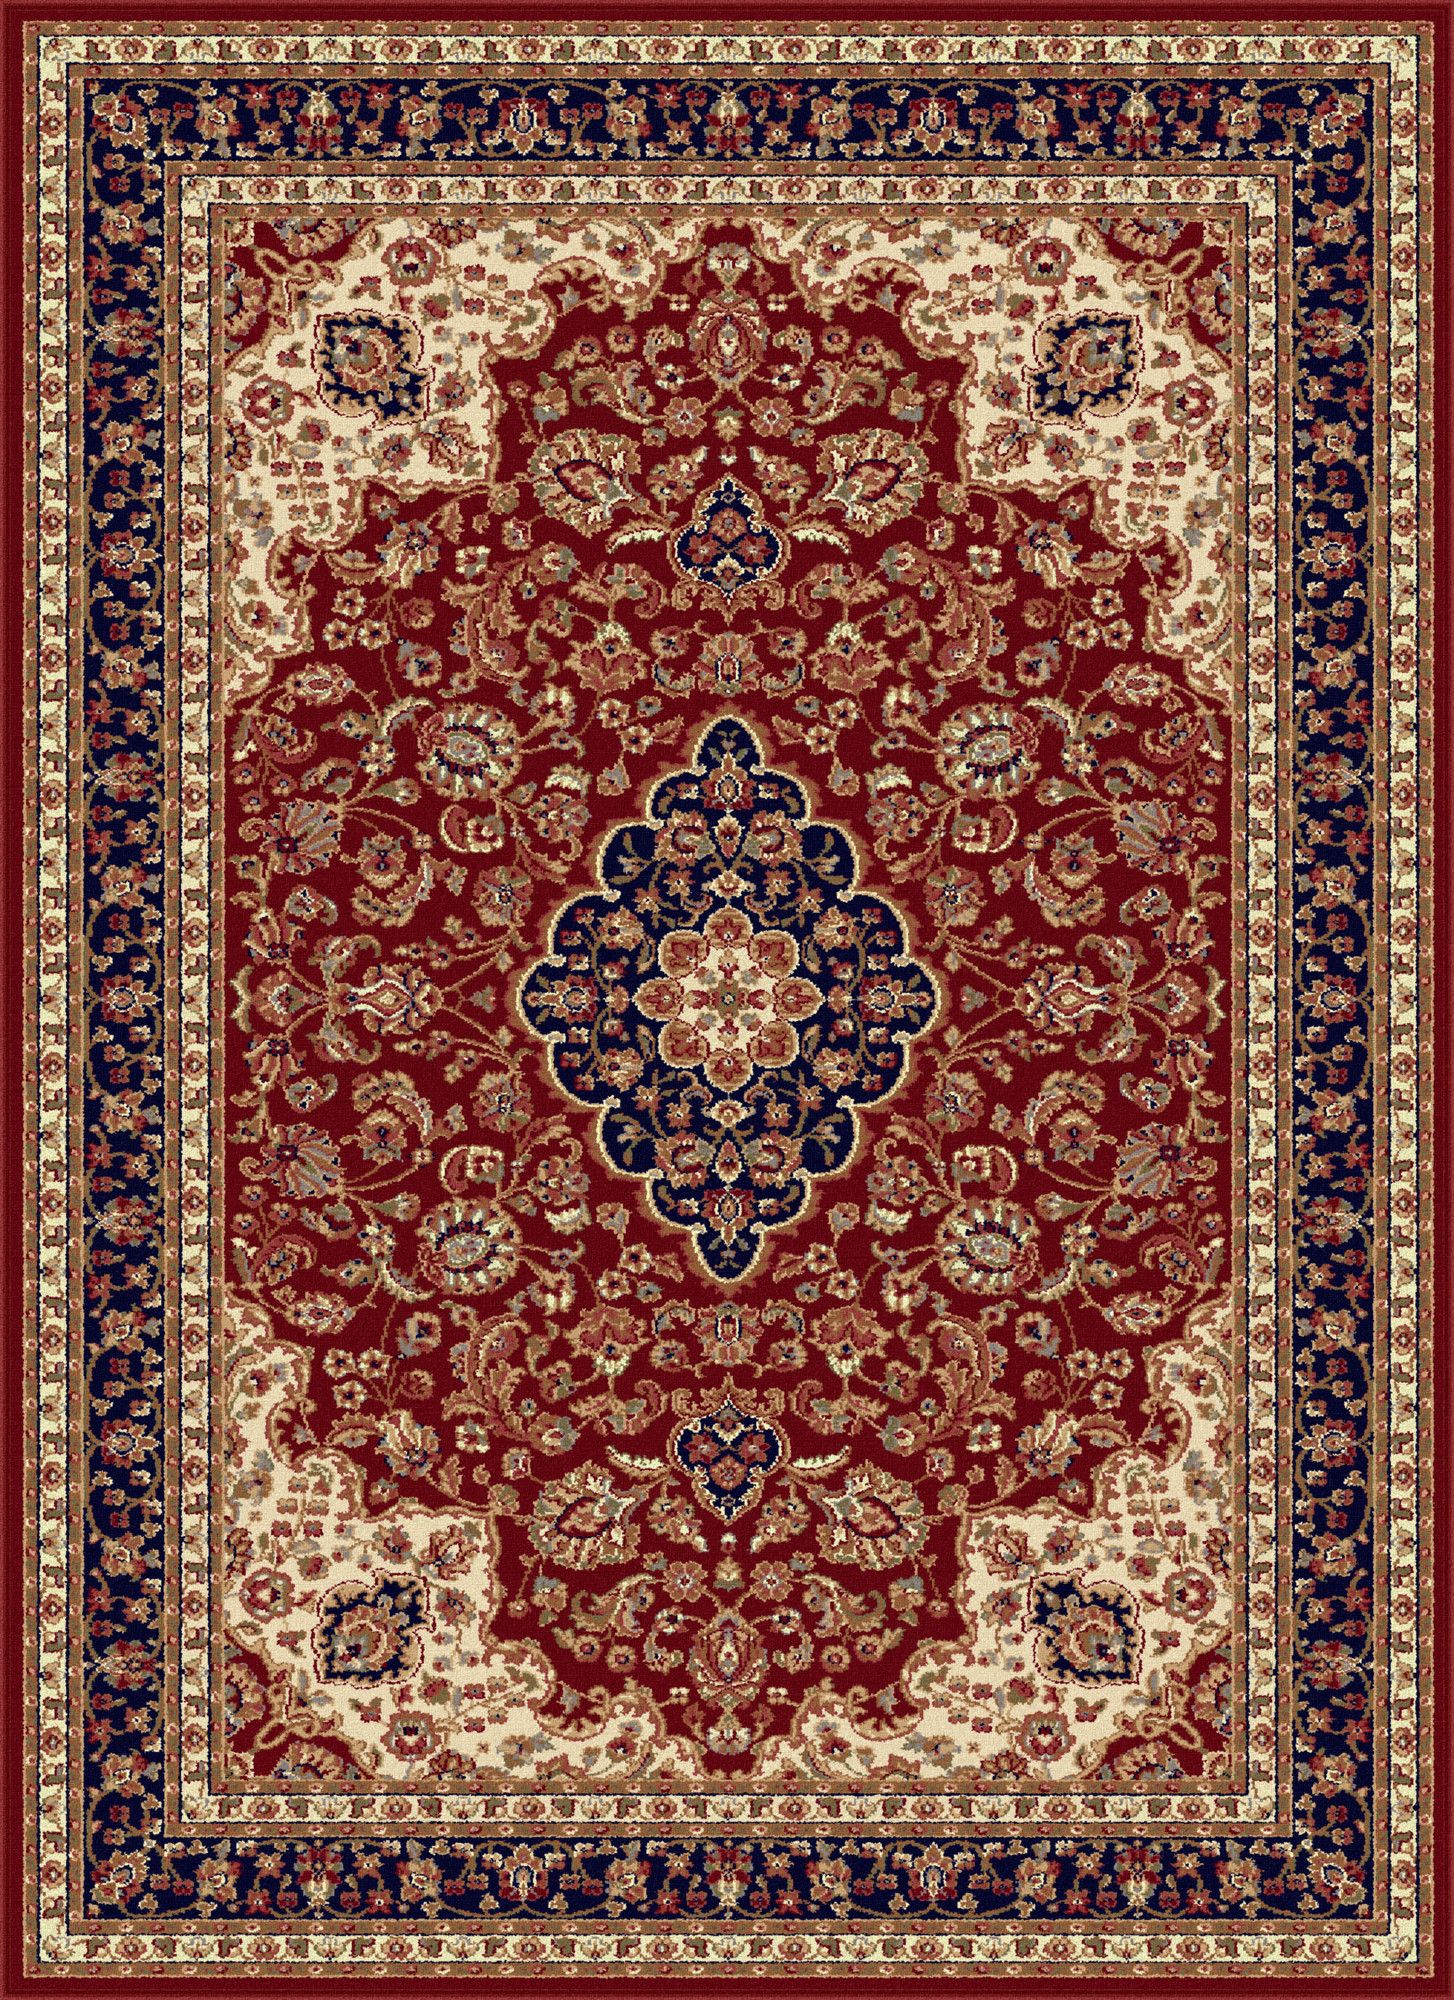 The Significance of Patterns in Oriental
Rugs